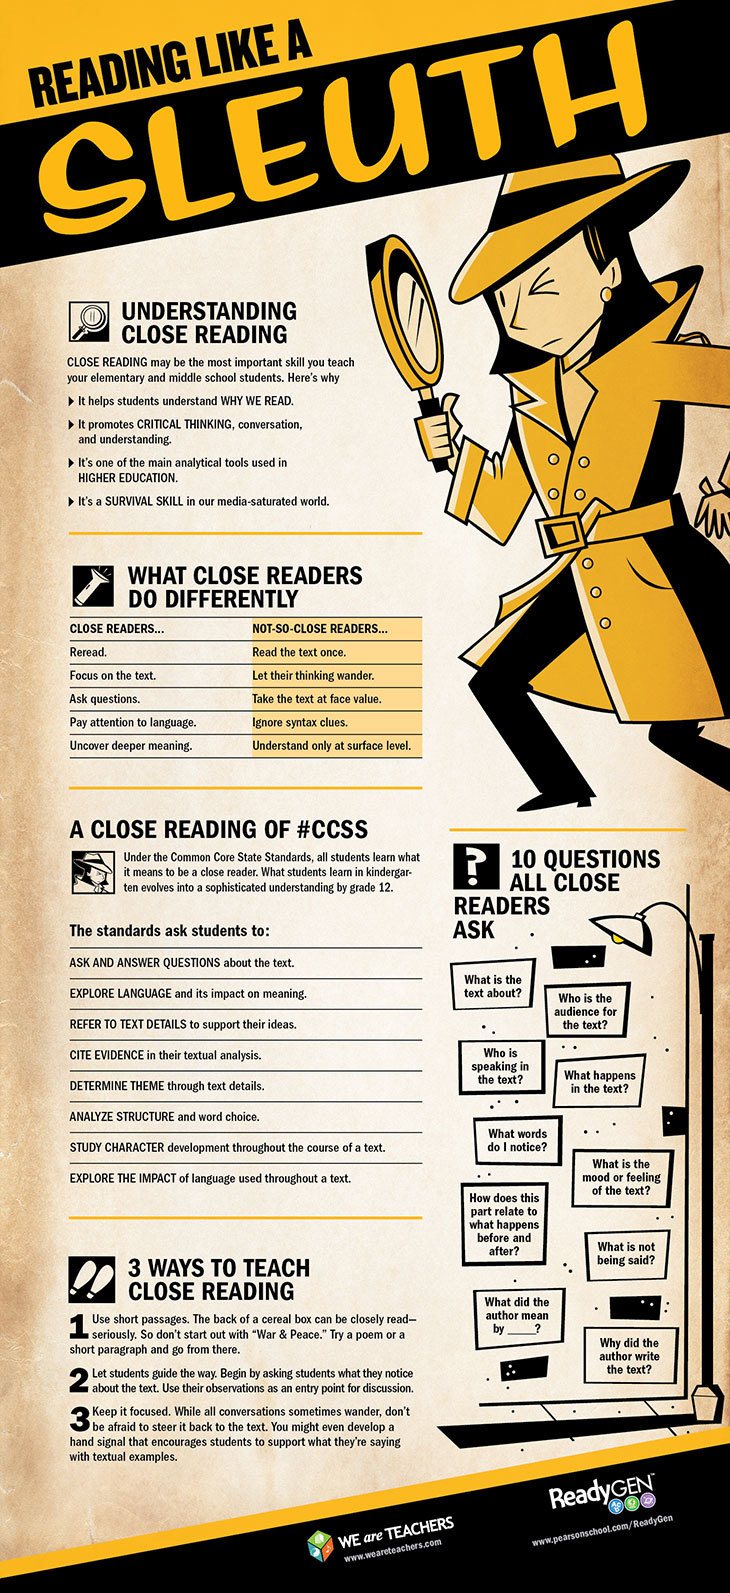 How to Teach Close Reading Infographic